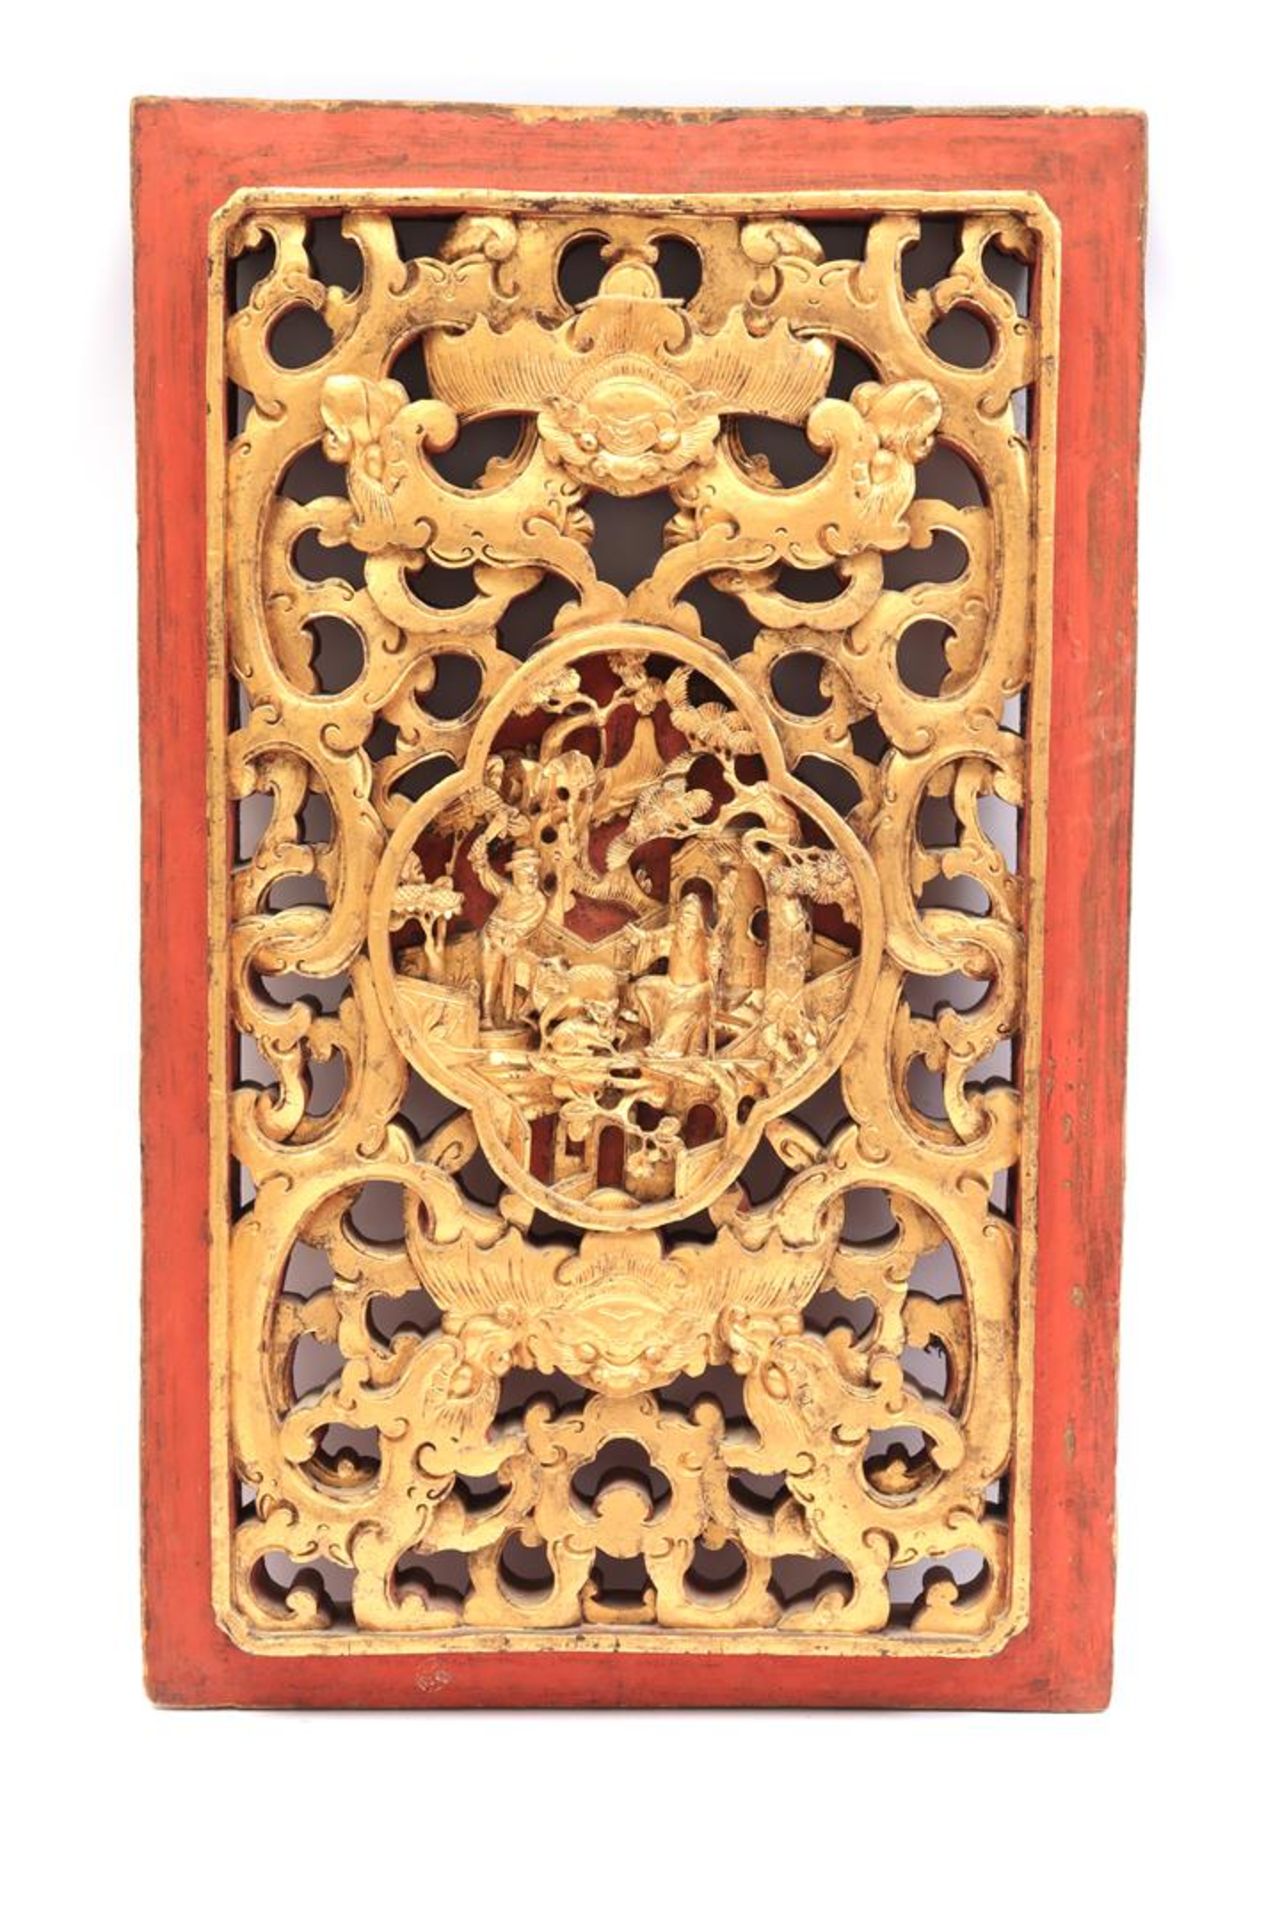 Richly carved wooden wall ornament - Image 4 of 4